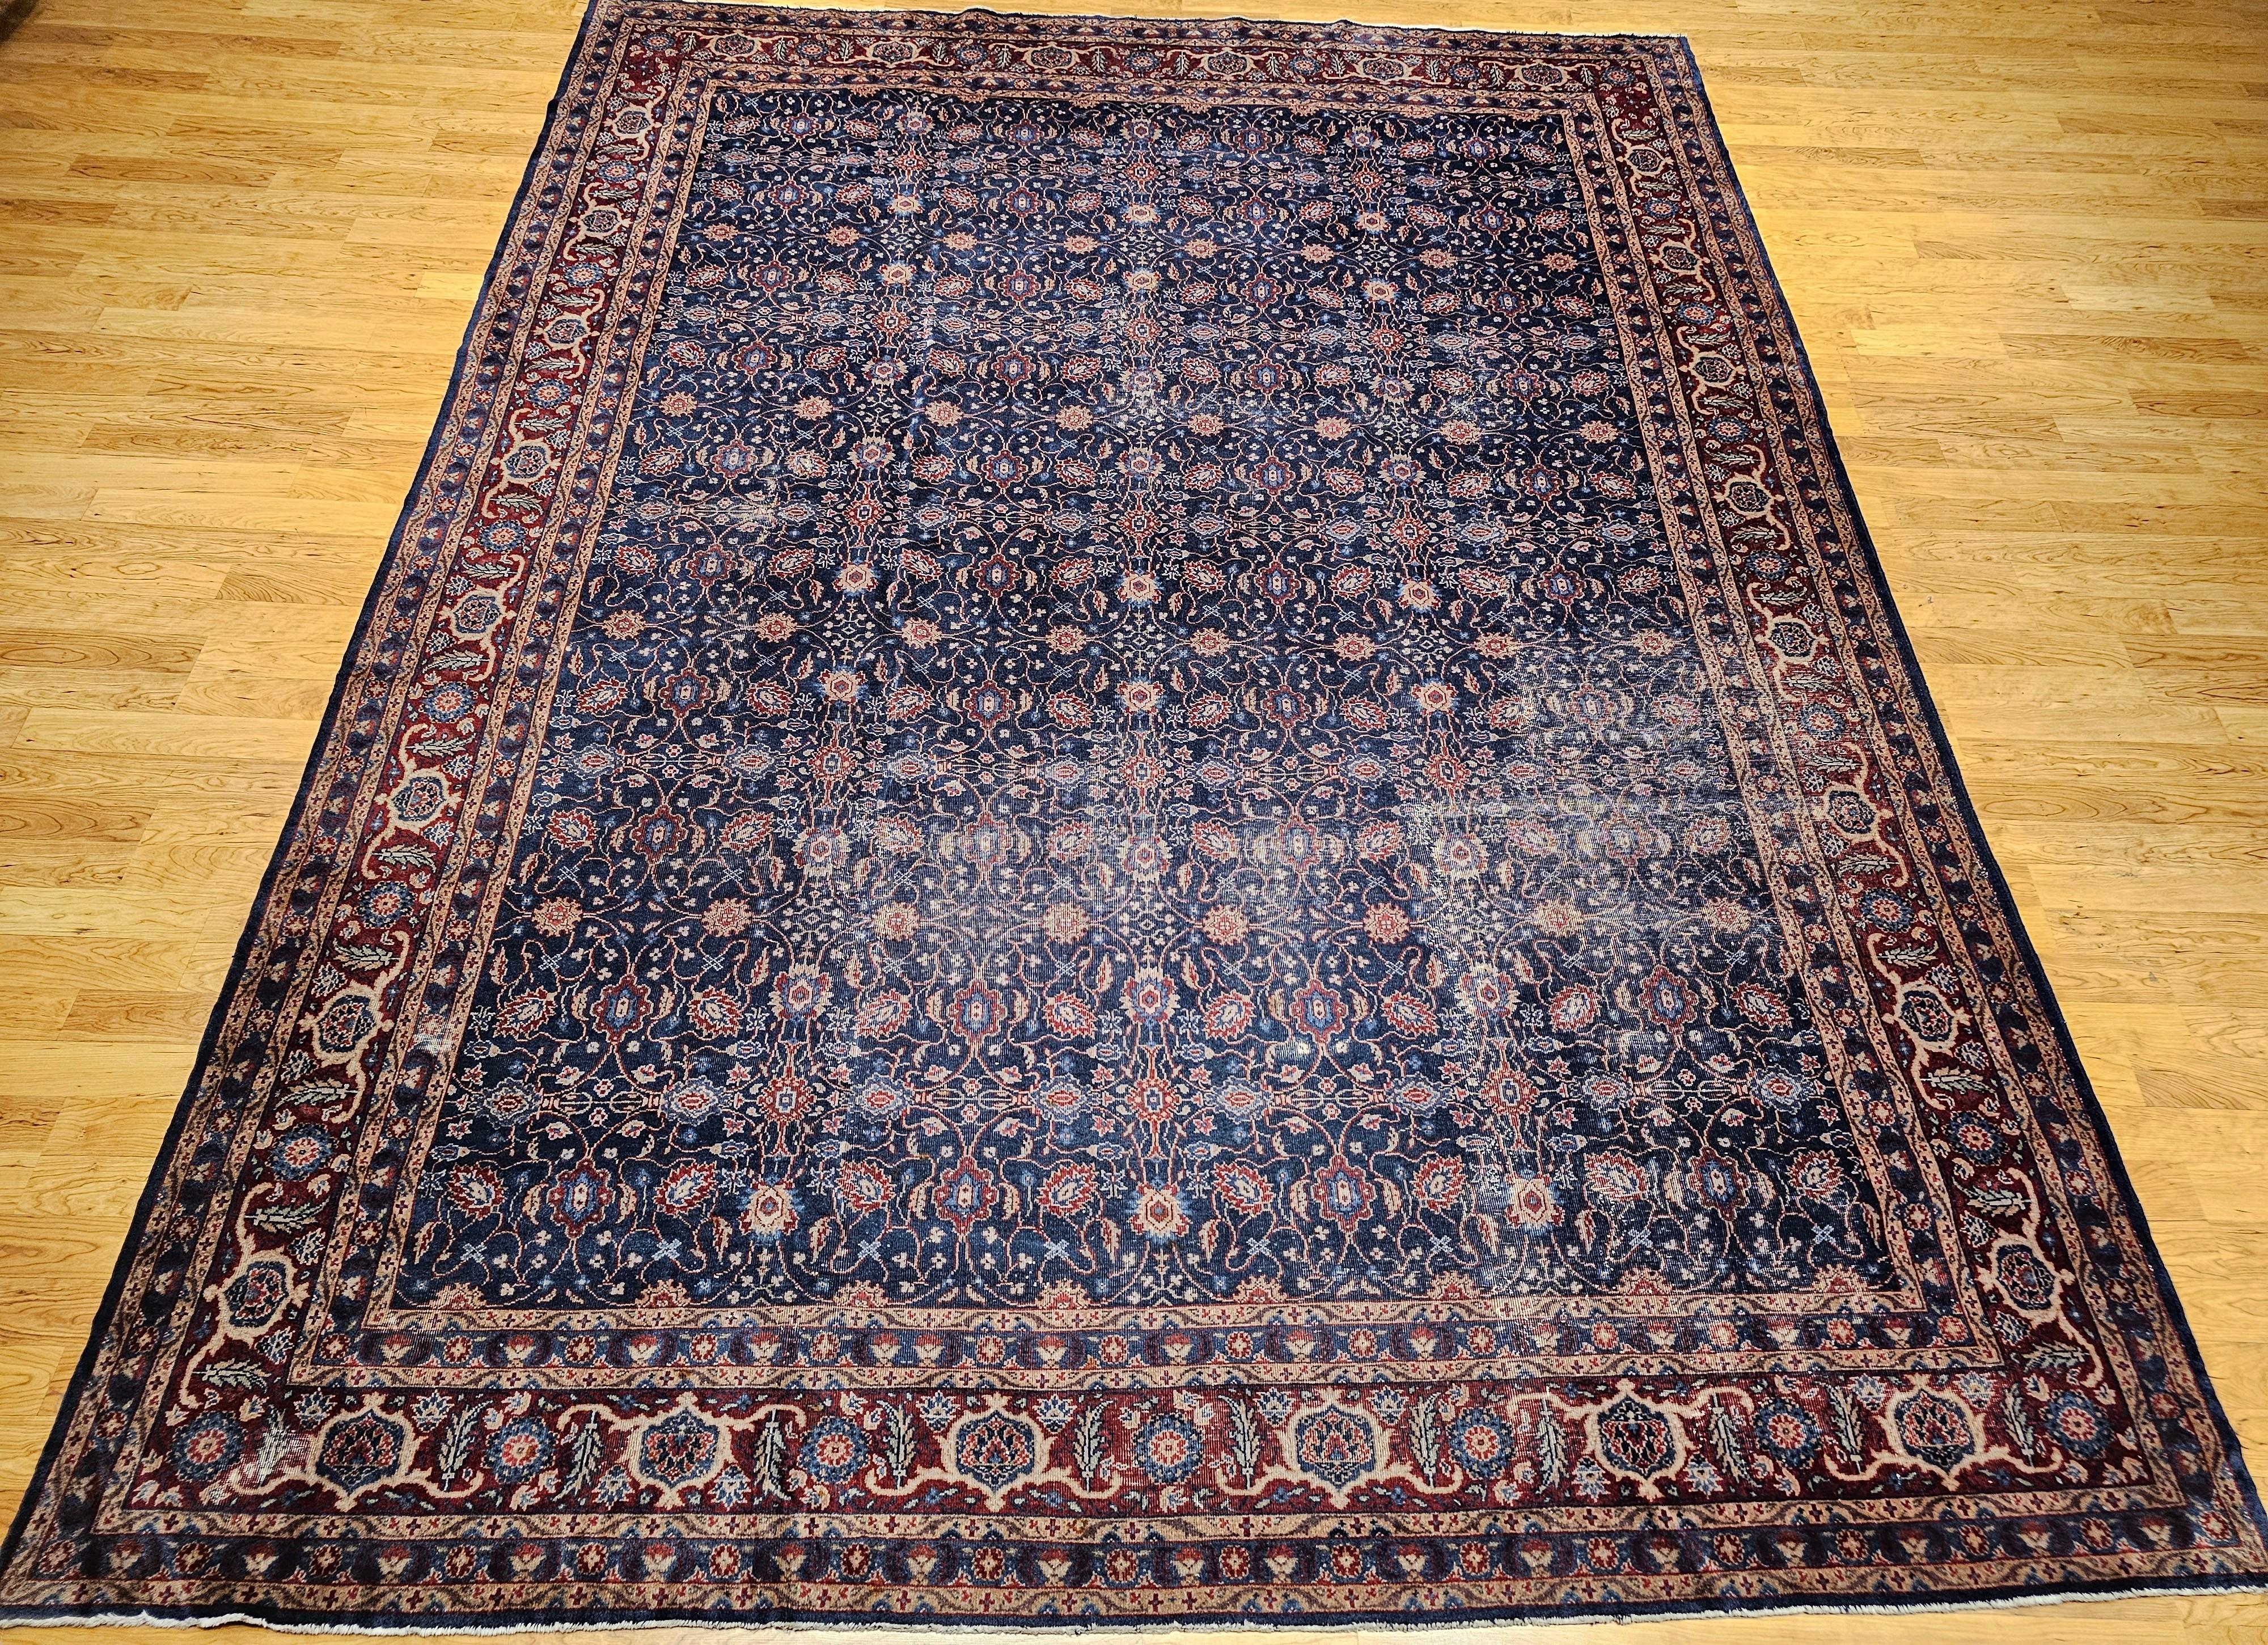 Beautiful oversized Persian Mahal Sultanabad carpet from the first quarter of the 1900s is in an allover design pattern.  The primary field color is dark blue with a dark burgundy border.  It has an allover pattern consisting of small medallions and